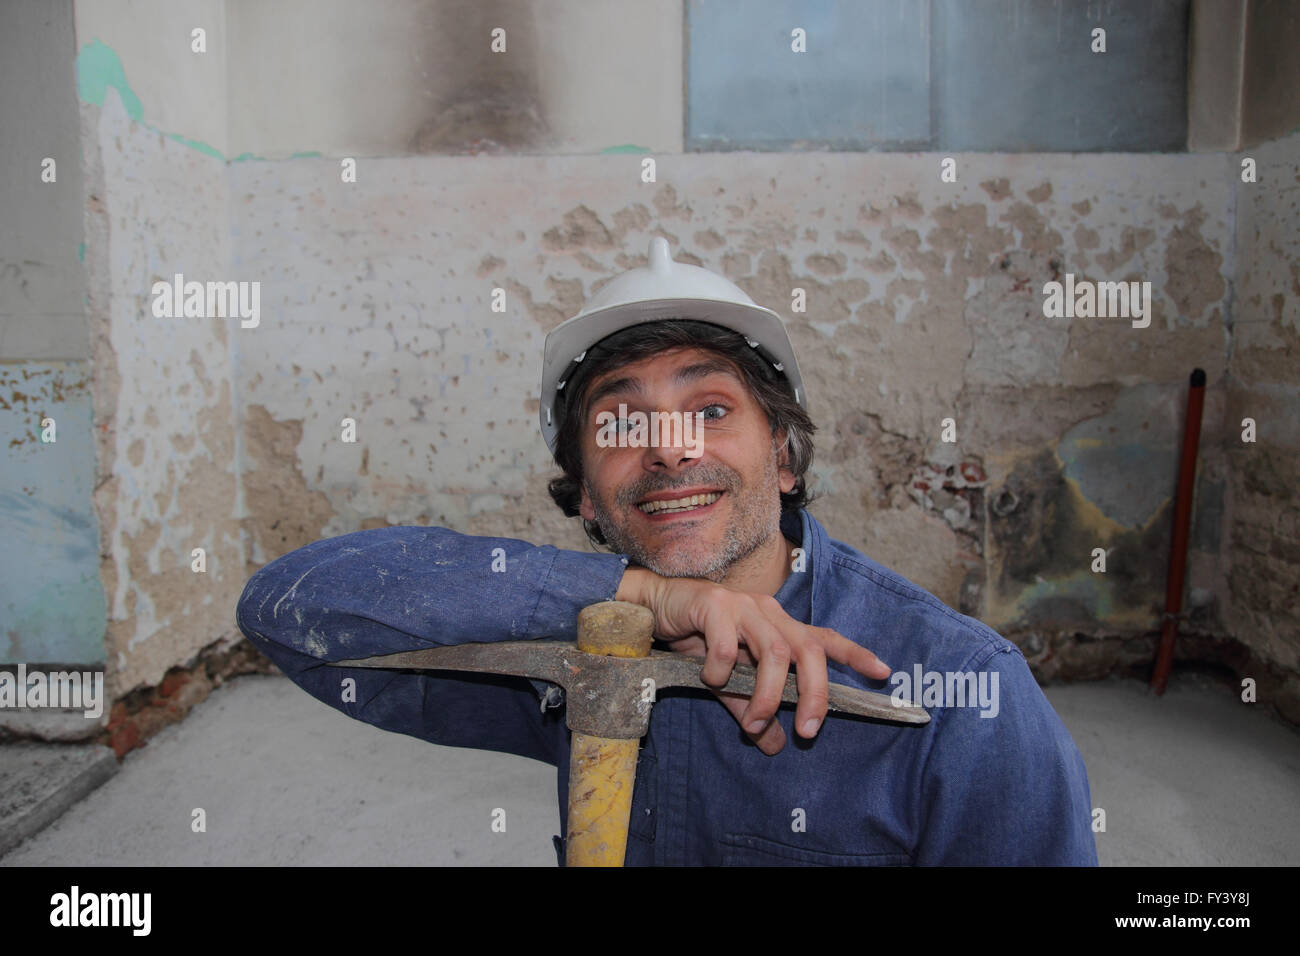 smiling Construction worker holding a pick axe Stock Photo